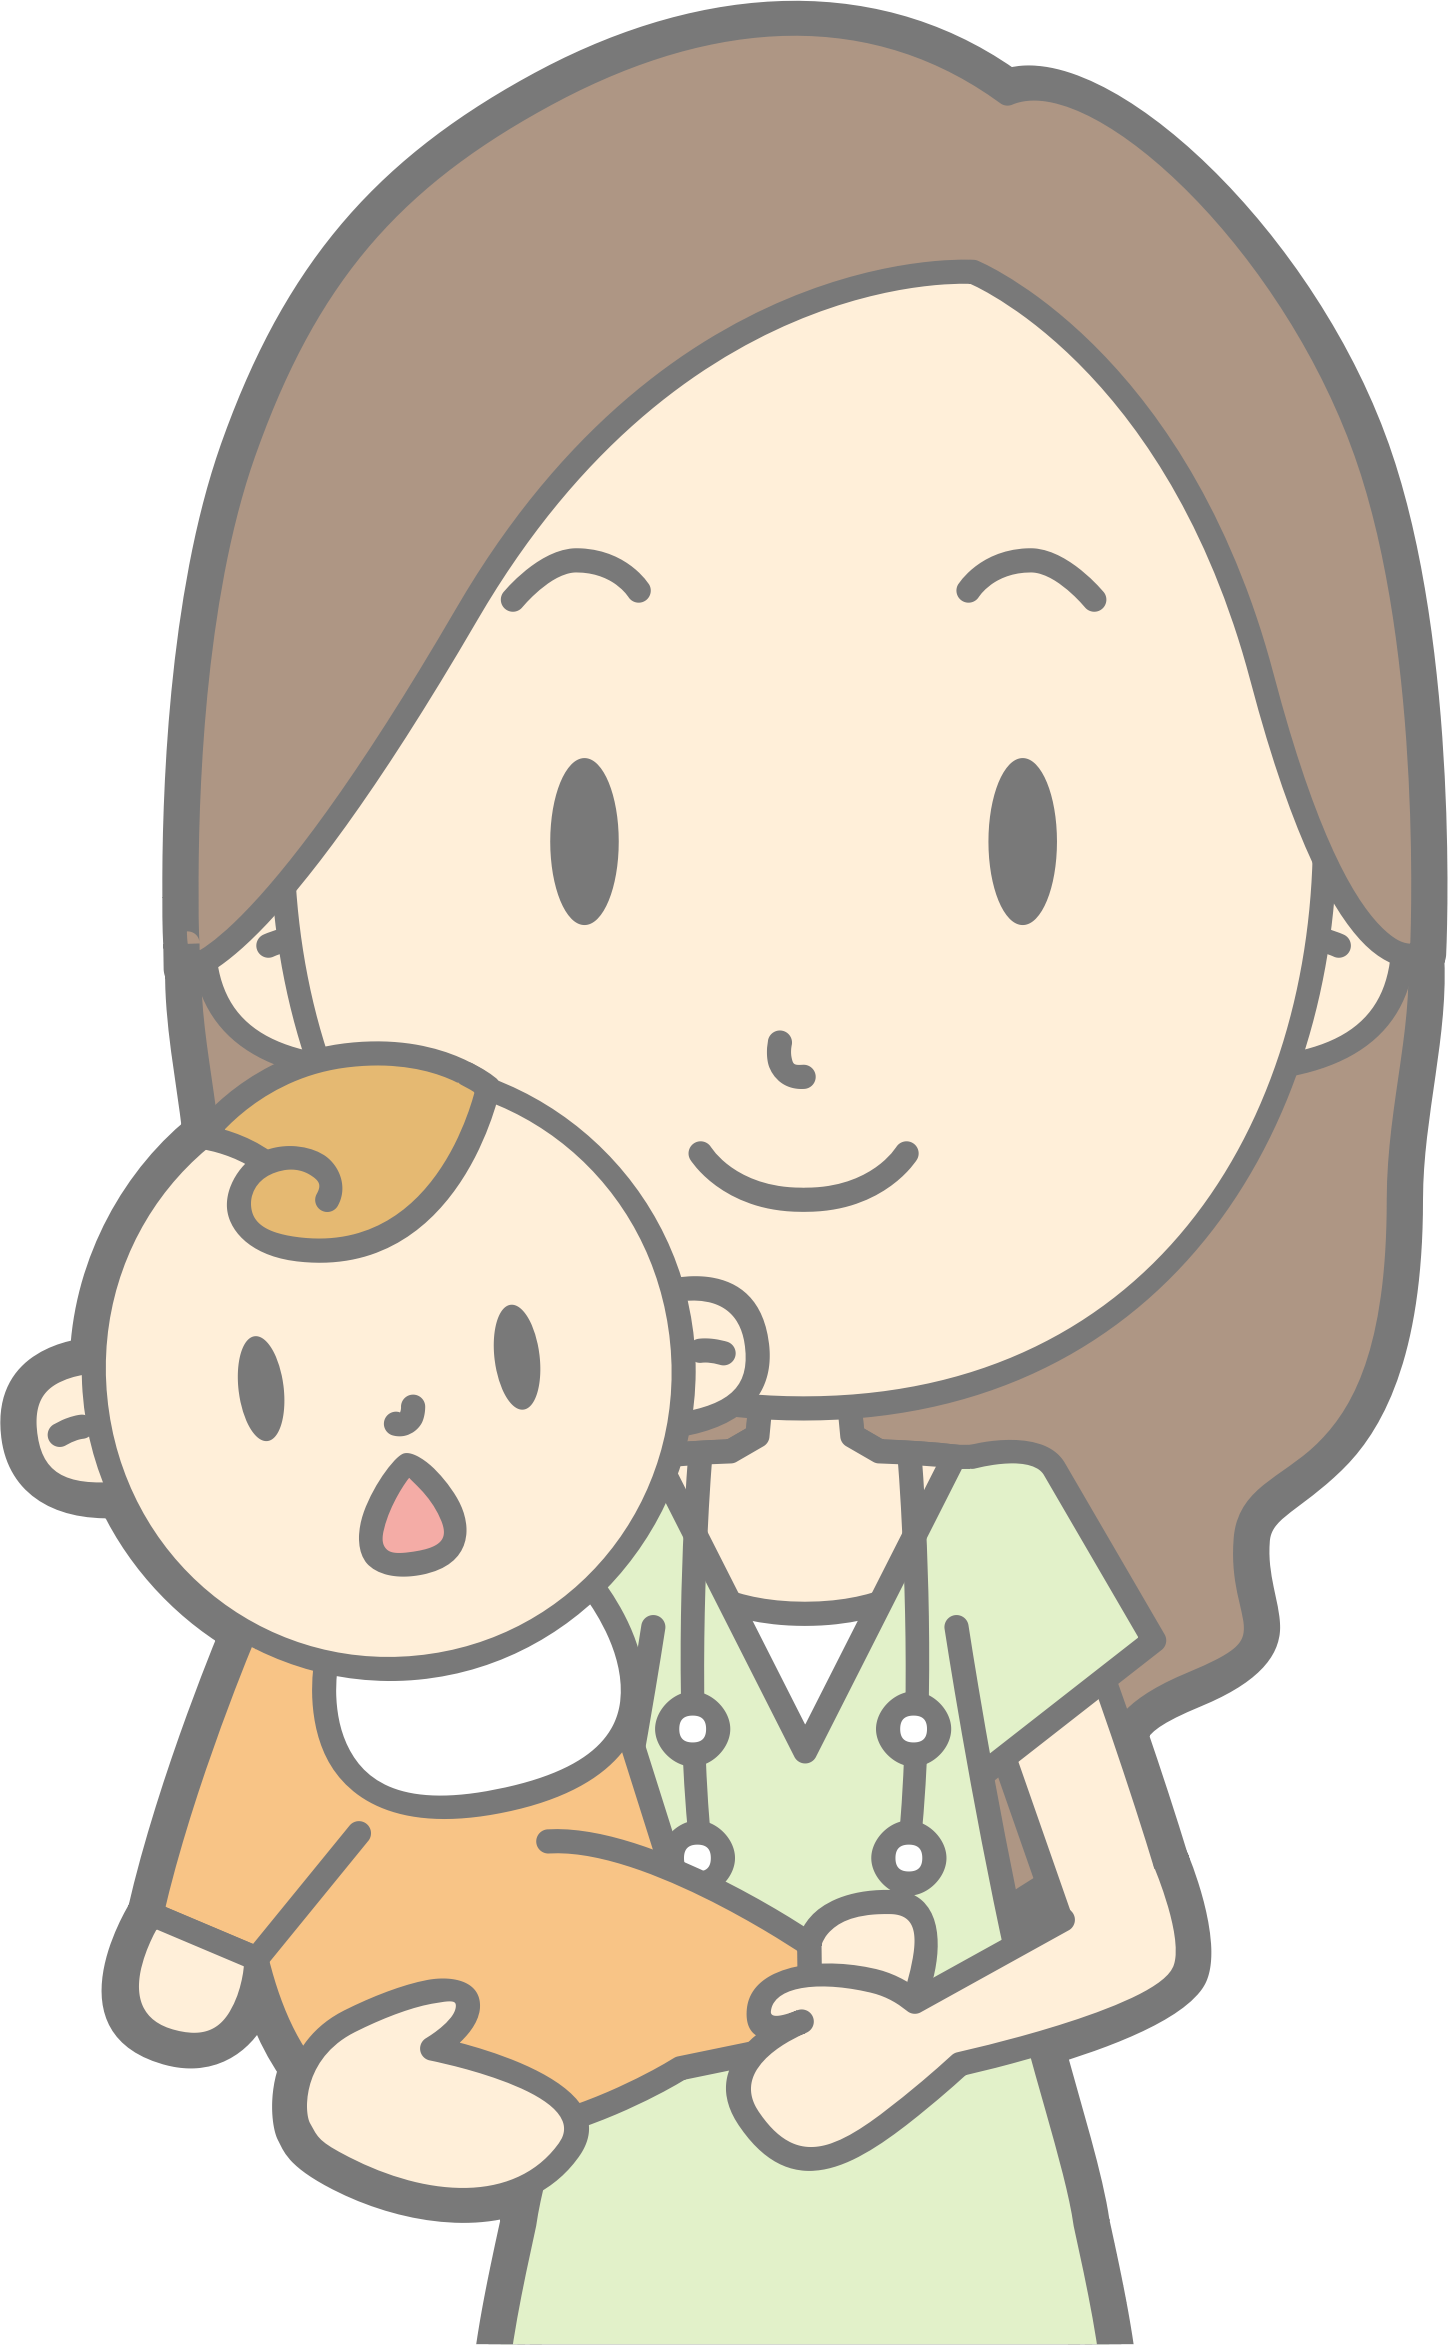 Mother clipart patient. And baby big image